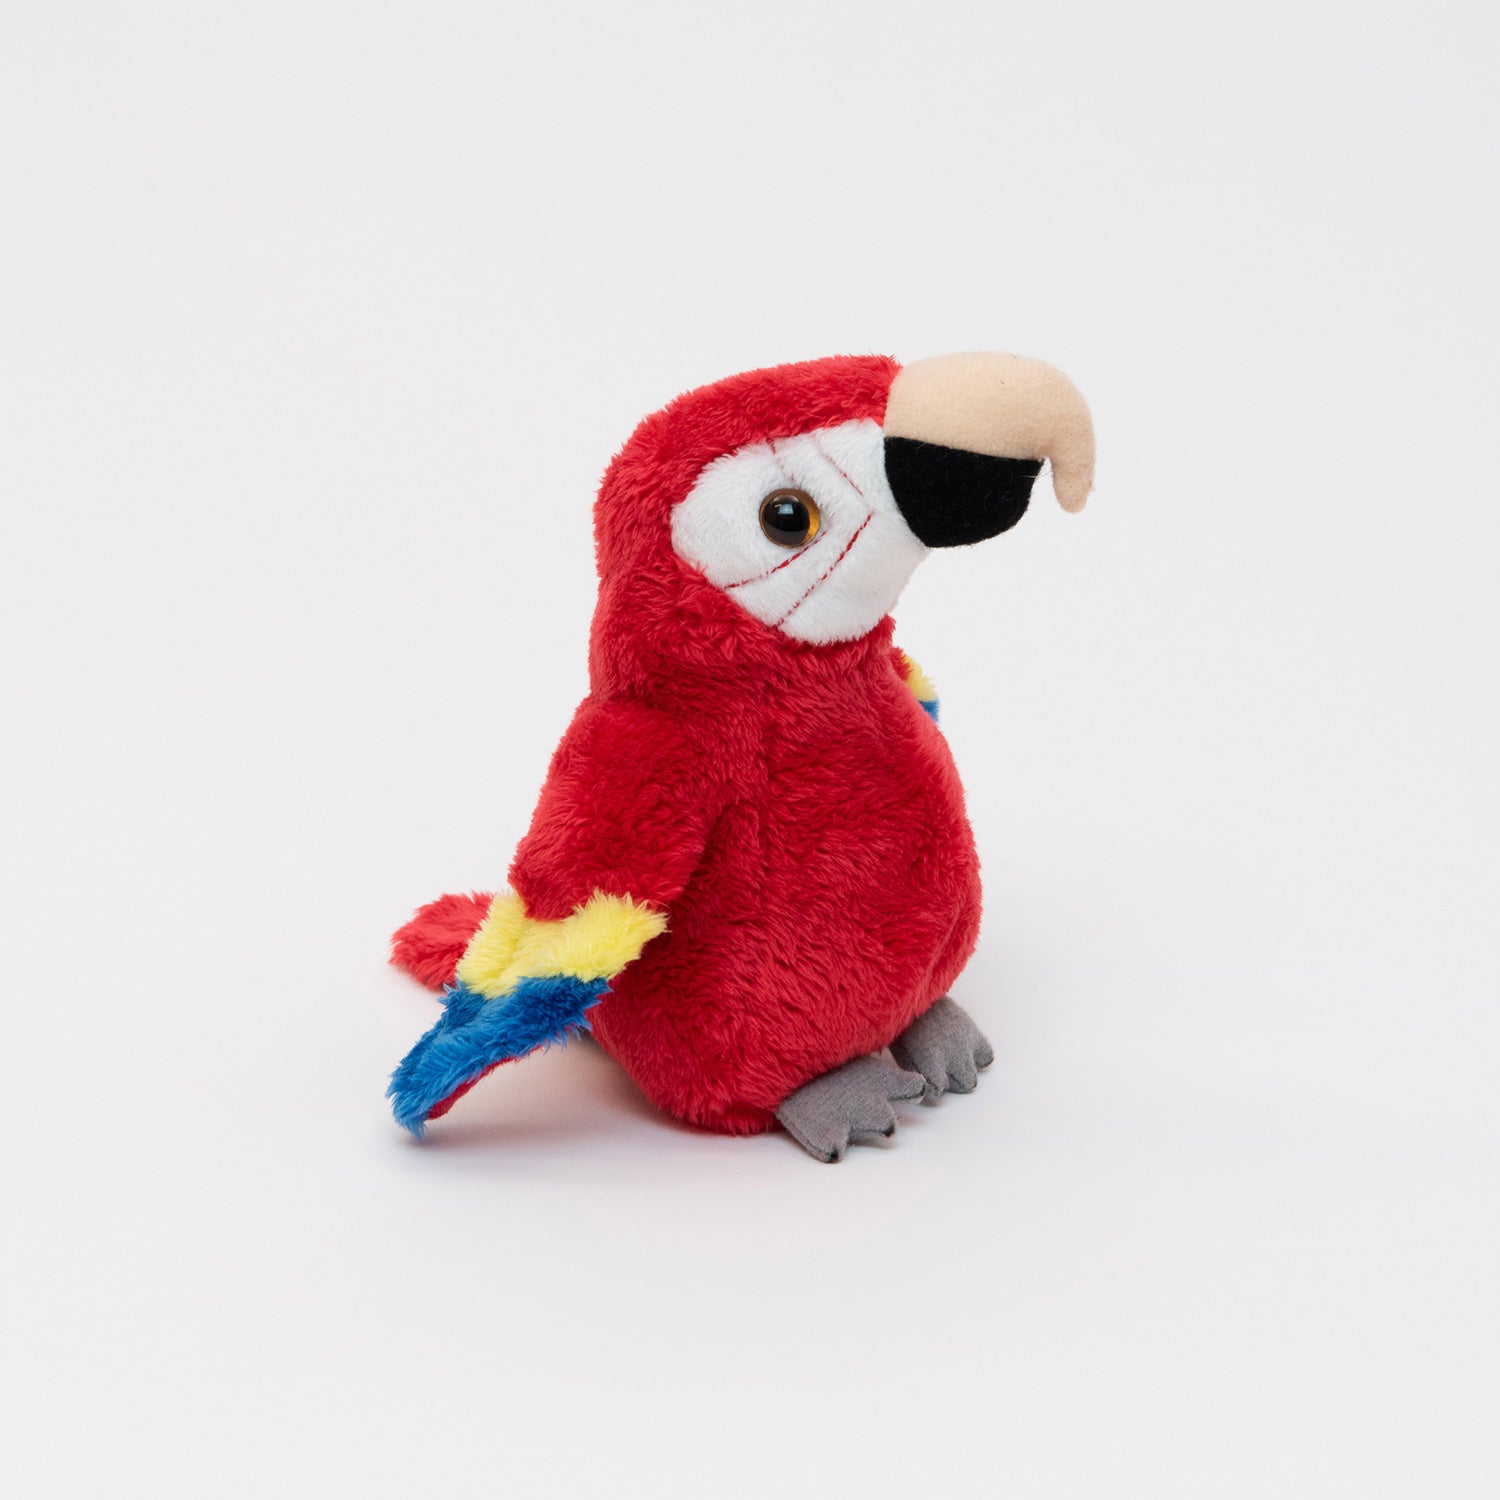 A plush scarlet macaw parrot on a white background.